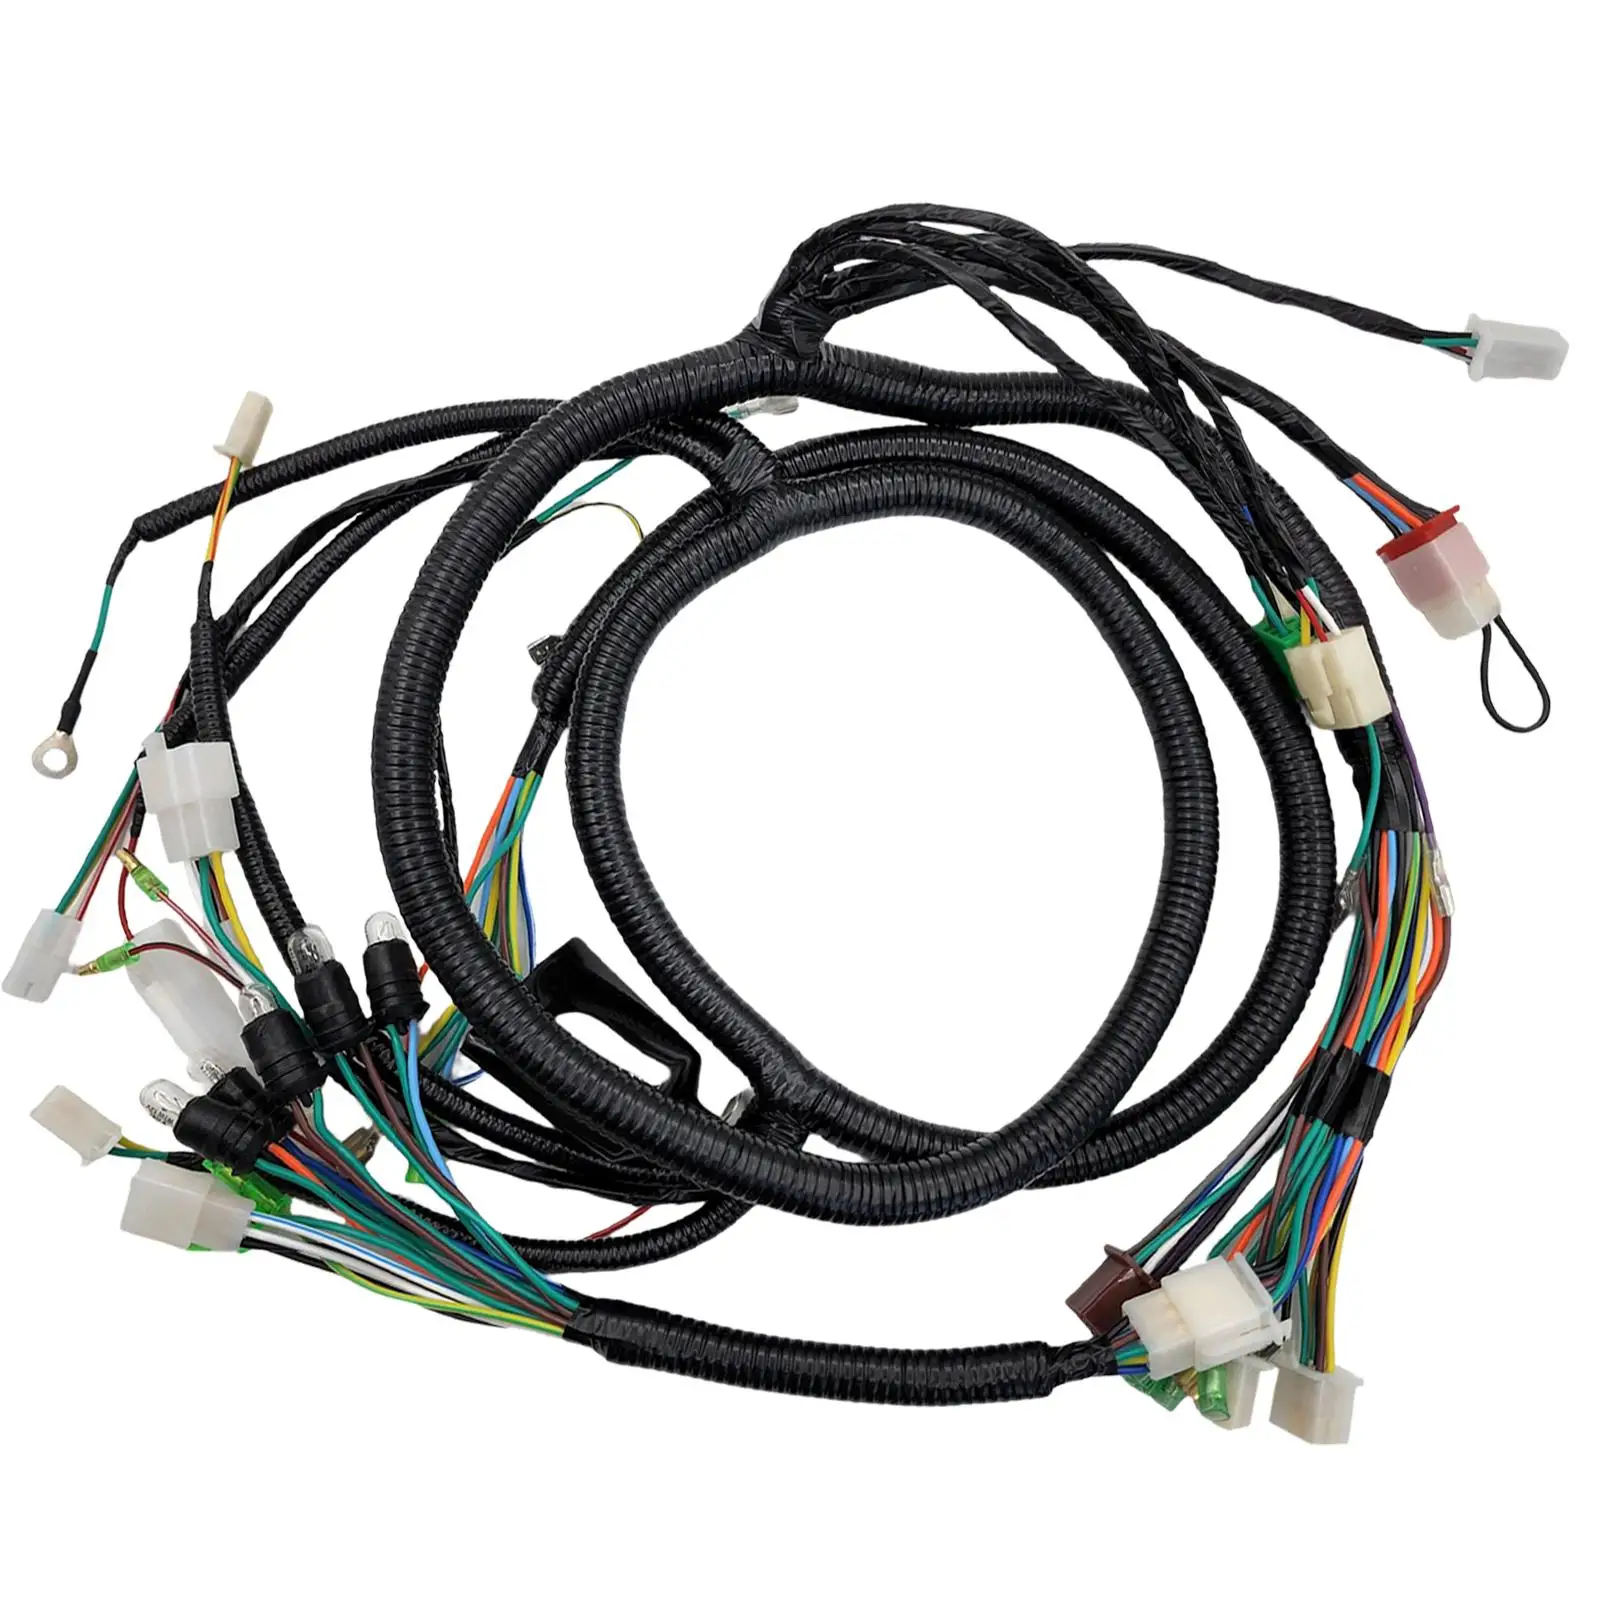 Replacement Harness Kits Wires for 50cc Scooters with 50cc Gy6 Engines, high reliability and high performance